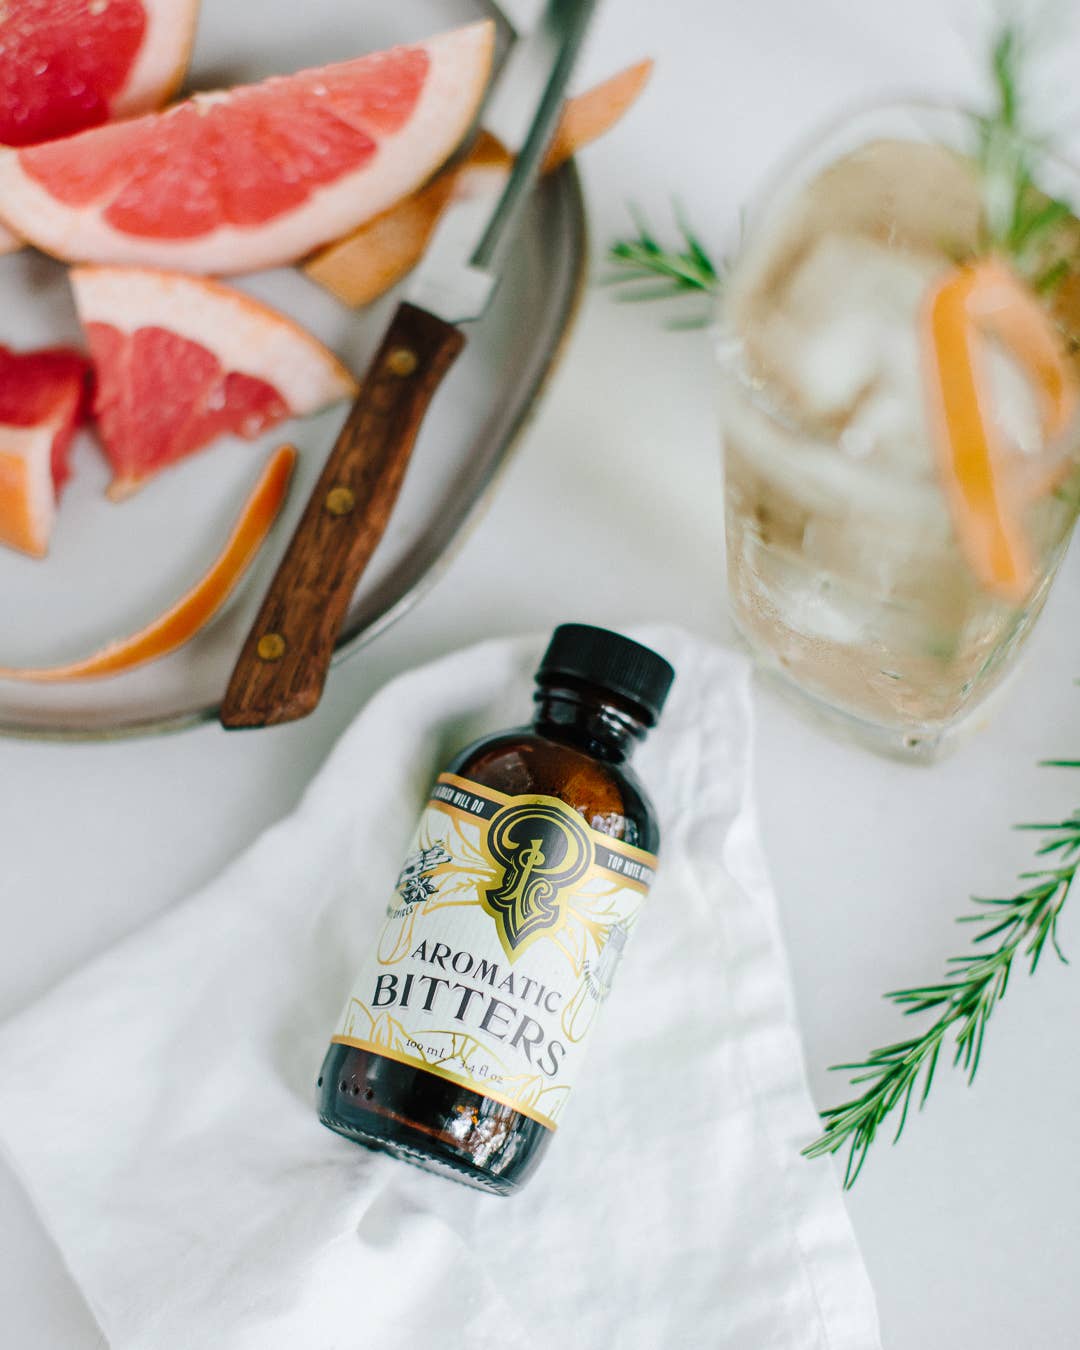 Aromatic Bitters 3.4 oz - cocktail / mocktail beverage mixer